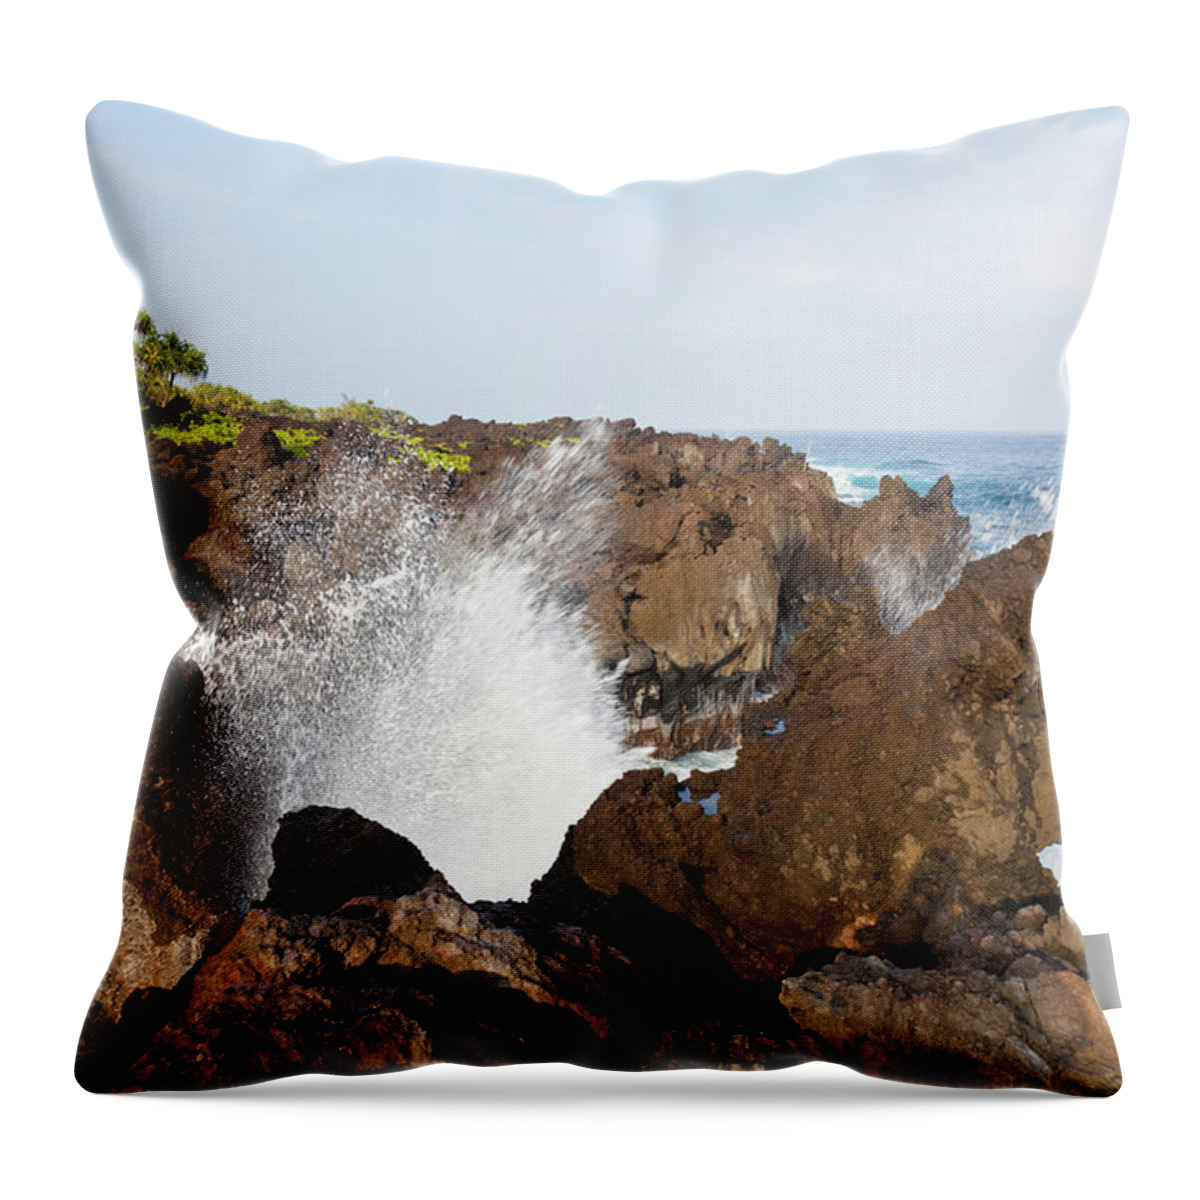 Scenics Throw Pillow featuring the photograph Rocky Coastline, Maui by Michaelutech